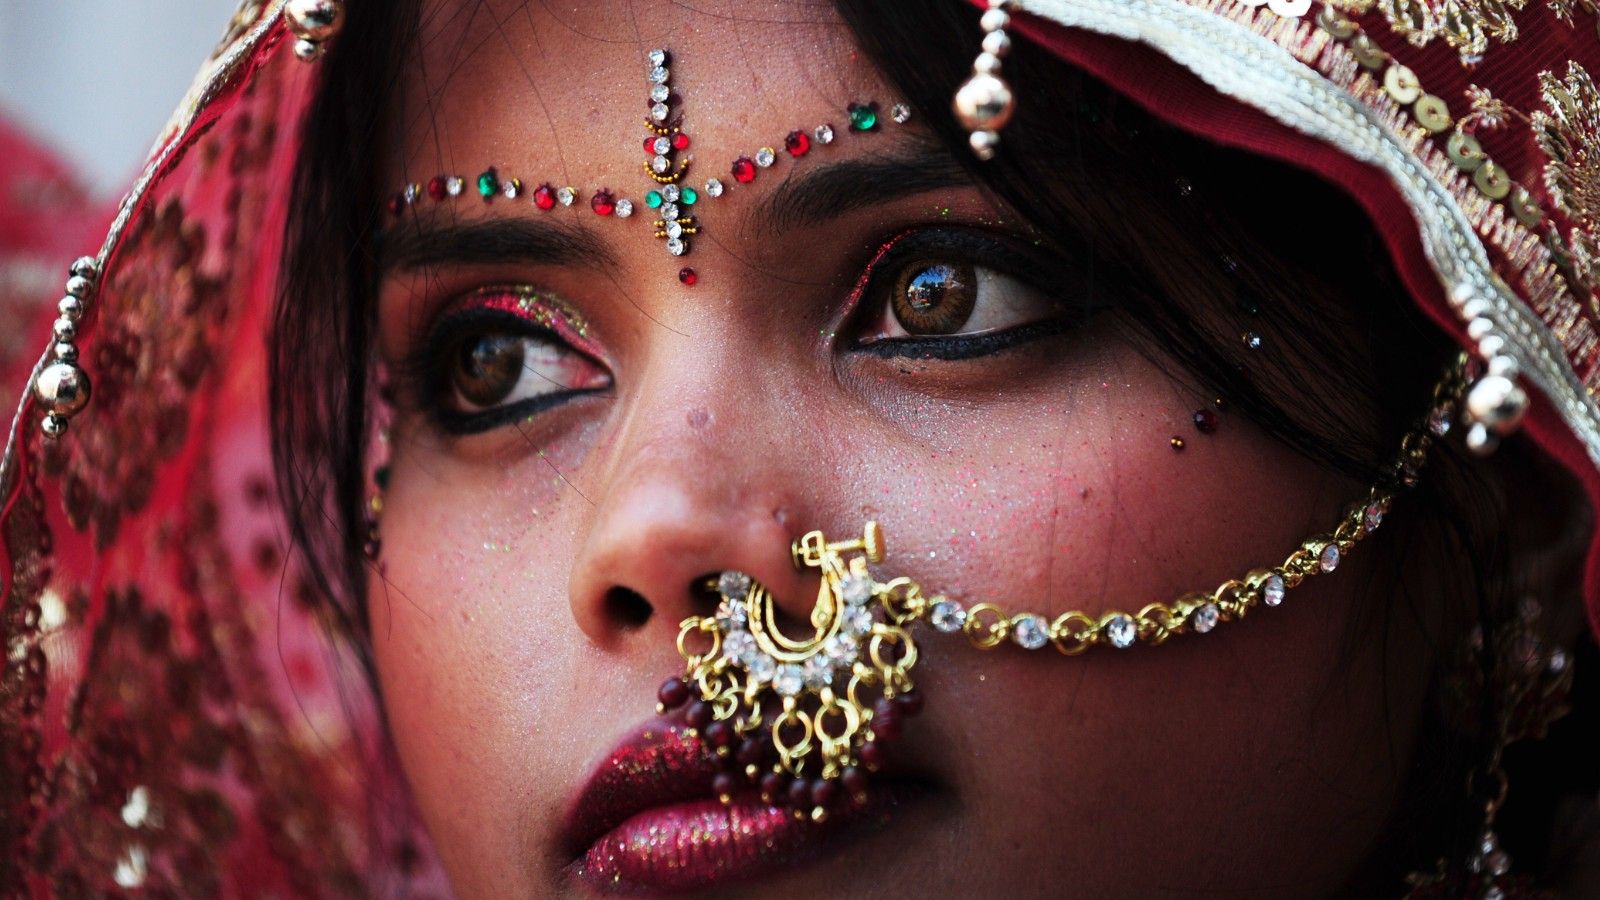 What does every Indian wedding need? Gold (and lots of it)